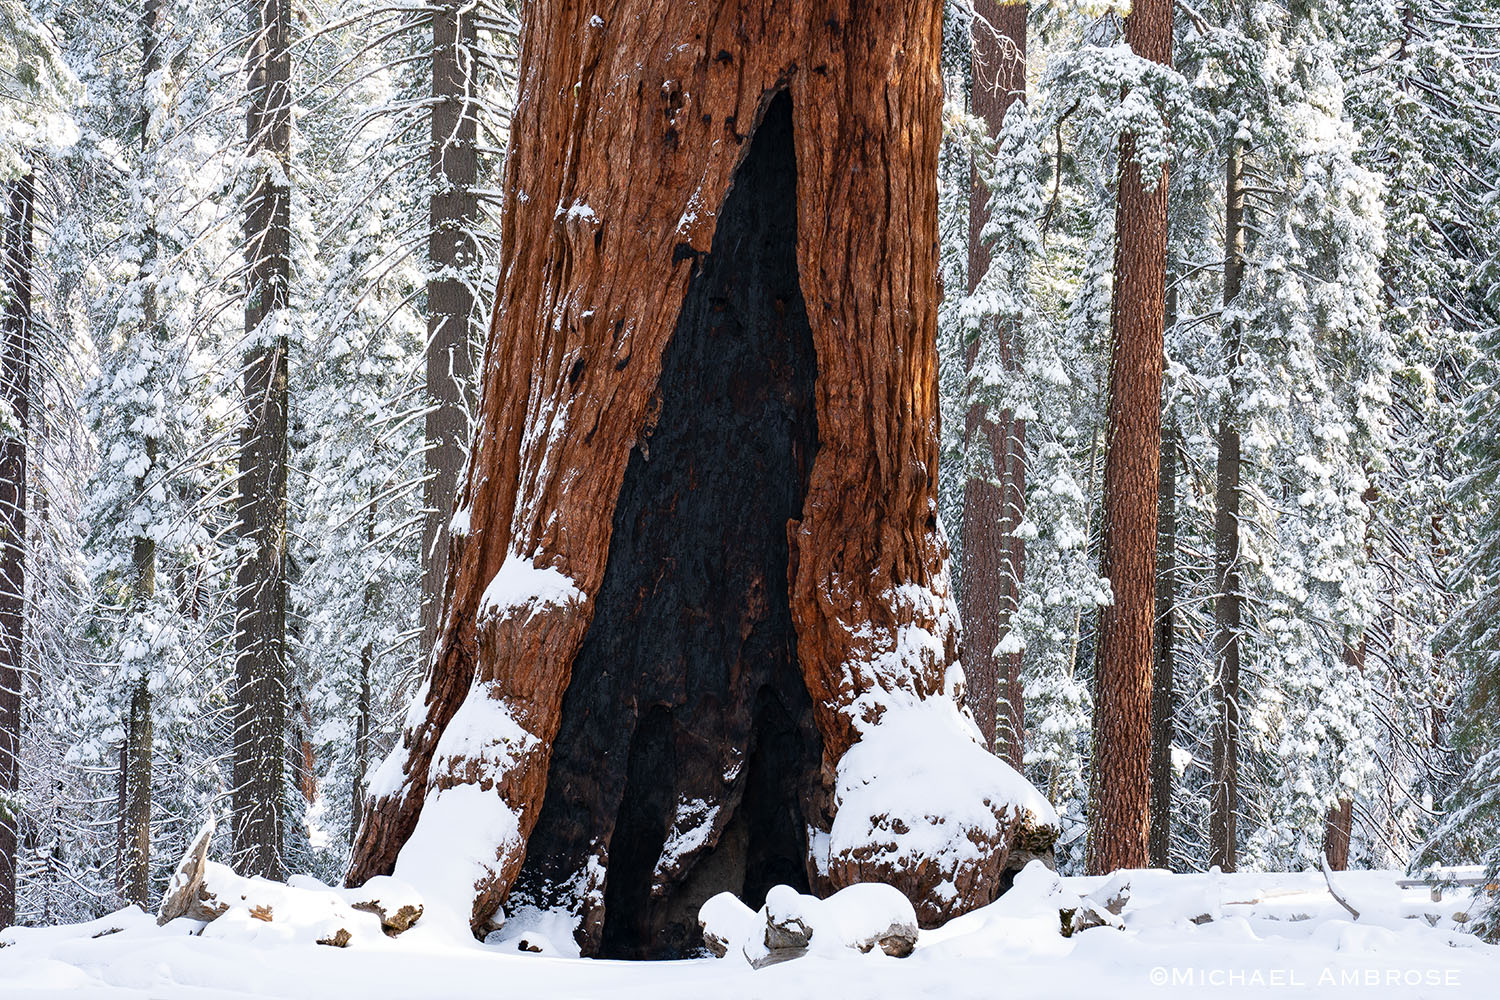 Snow on Mariposa Grove's Sequoia tree named the Grizzly Giant, in Yosemite National Park.